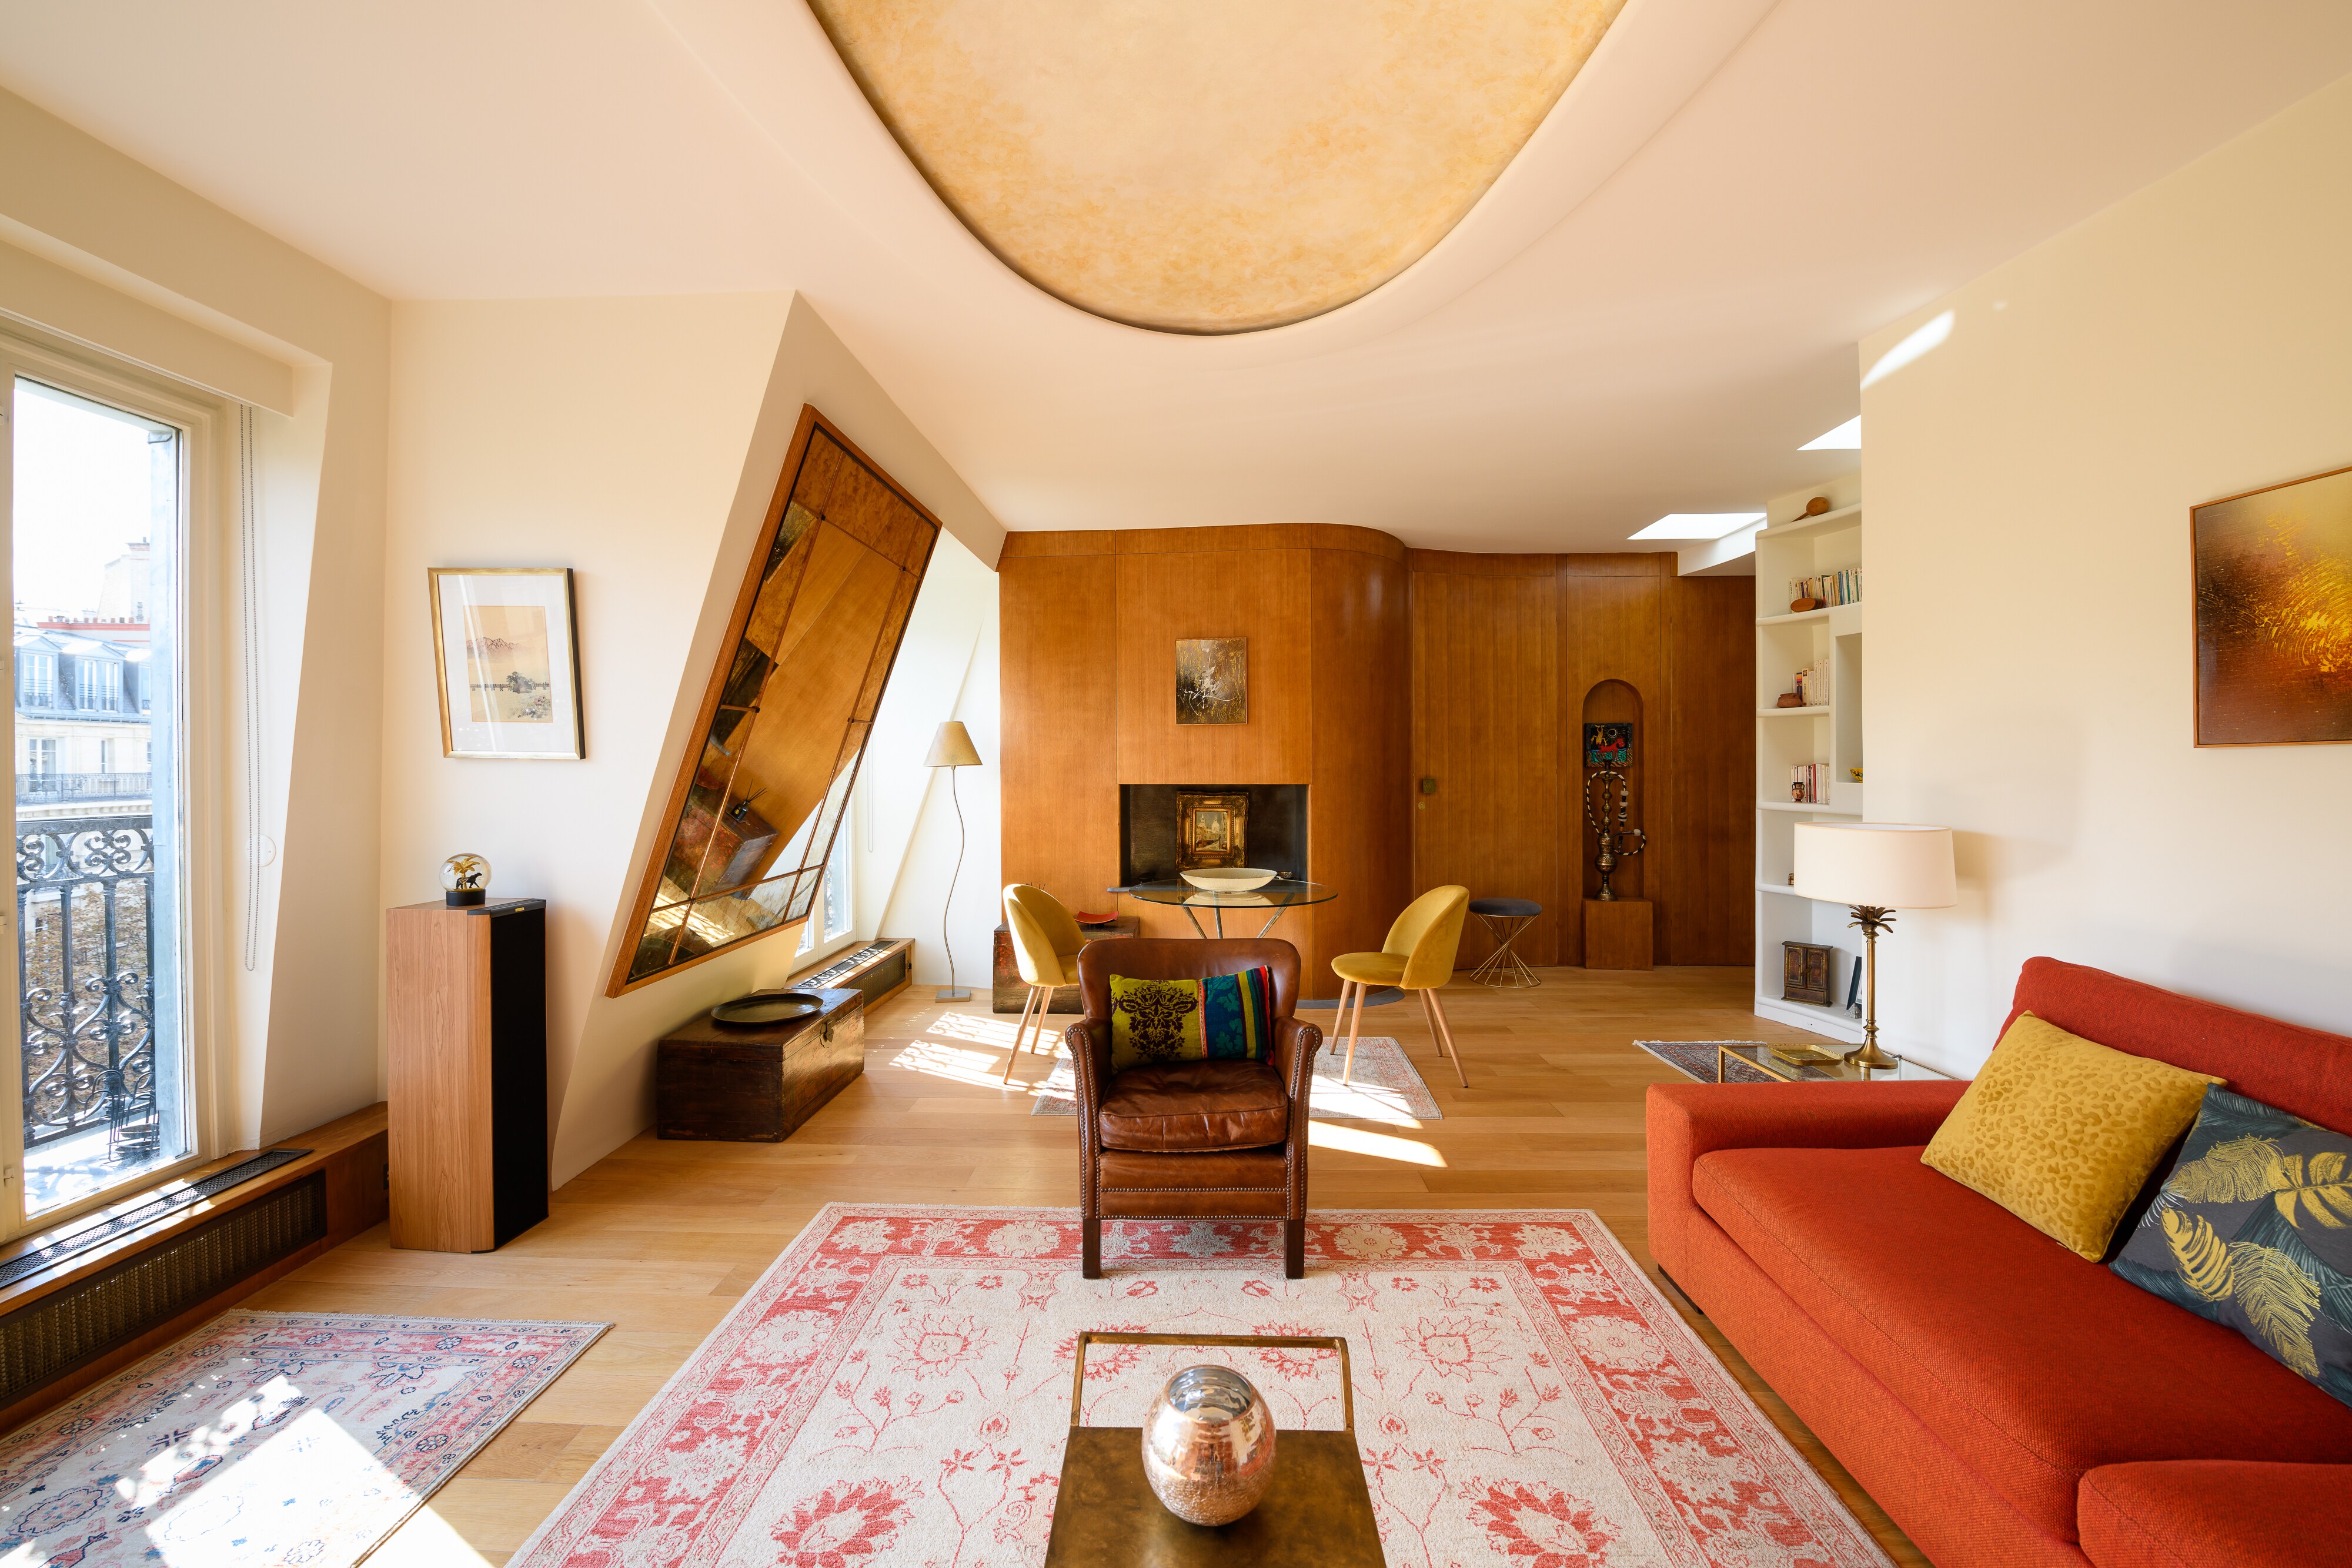 Property Image 1 - Magnificent nest overlooking the Sacre-Coeur - by feelluxuryholidays